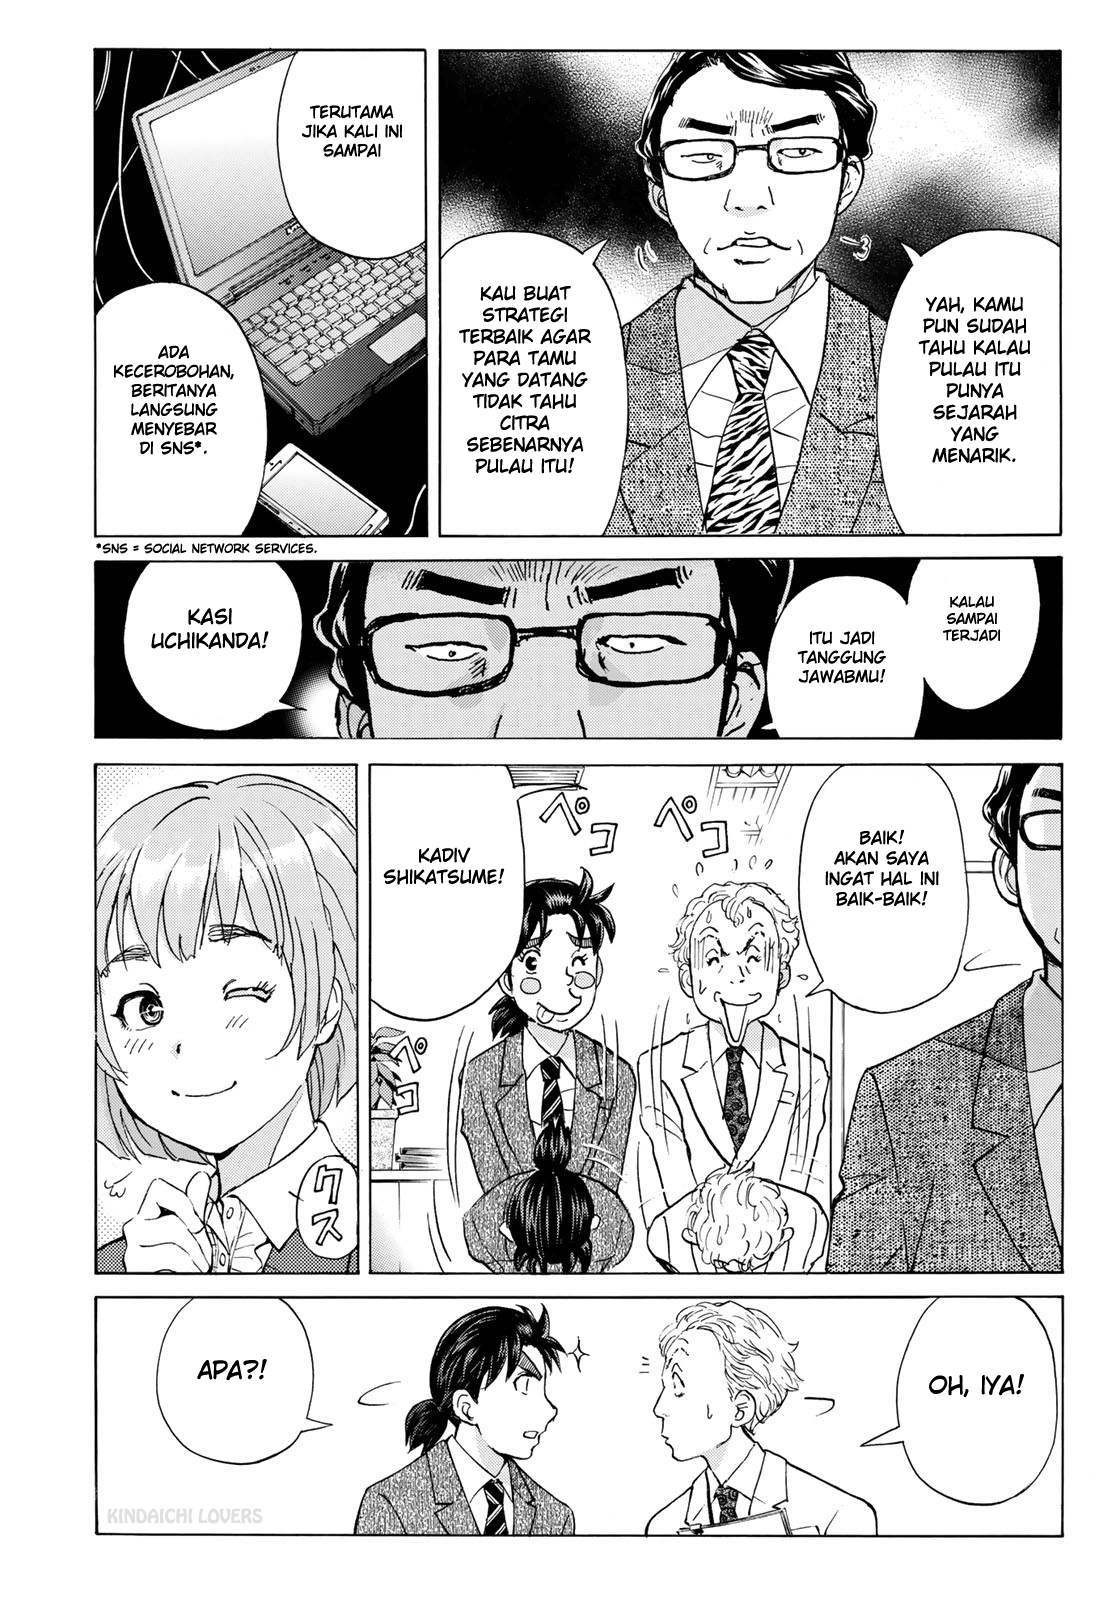 37 Year Old Kindaichi Case Files Chapter 1